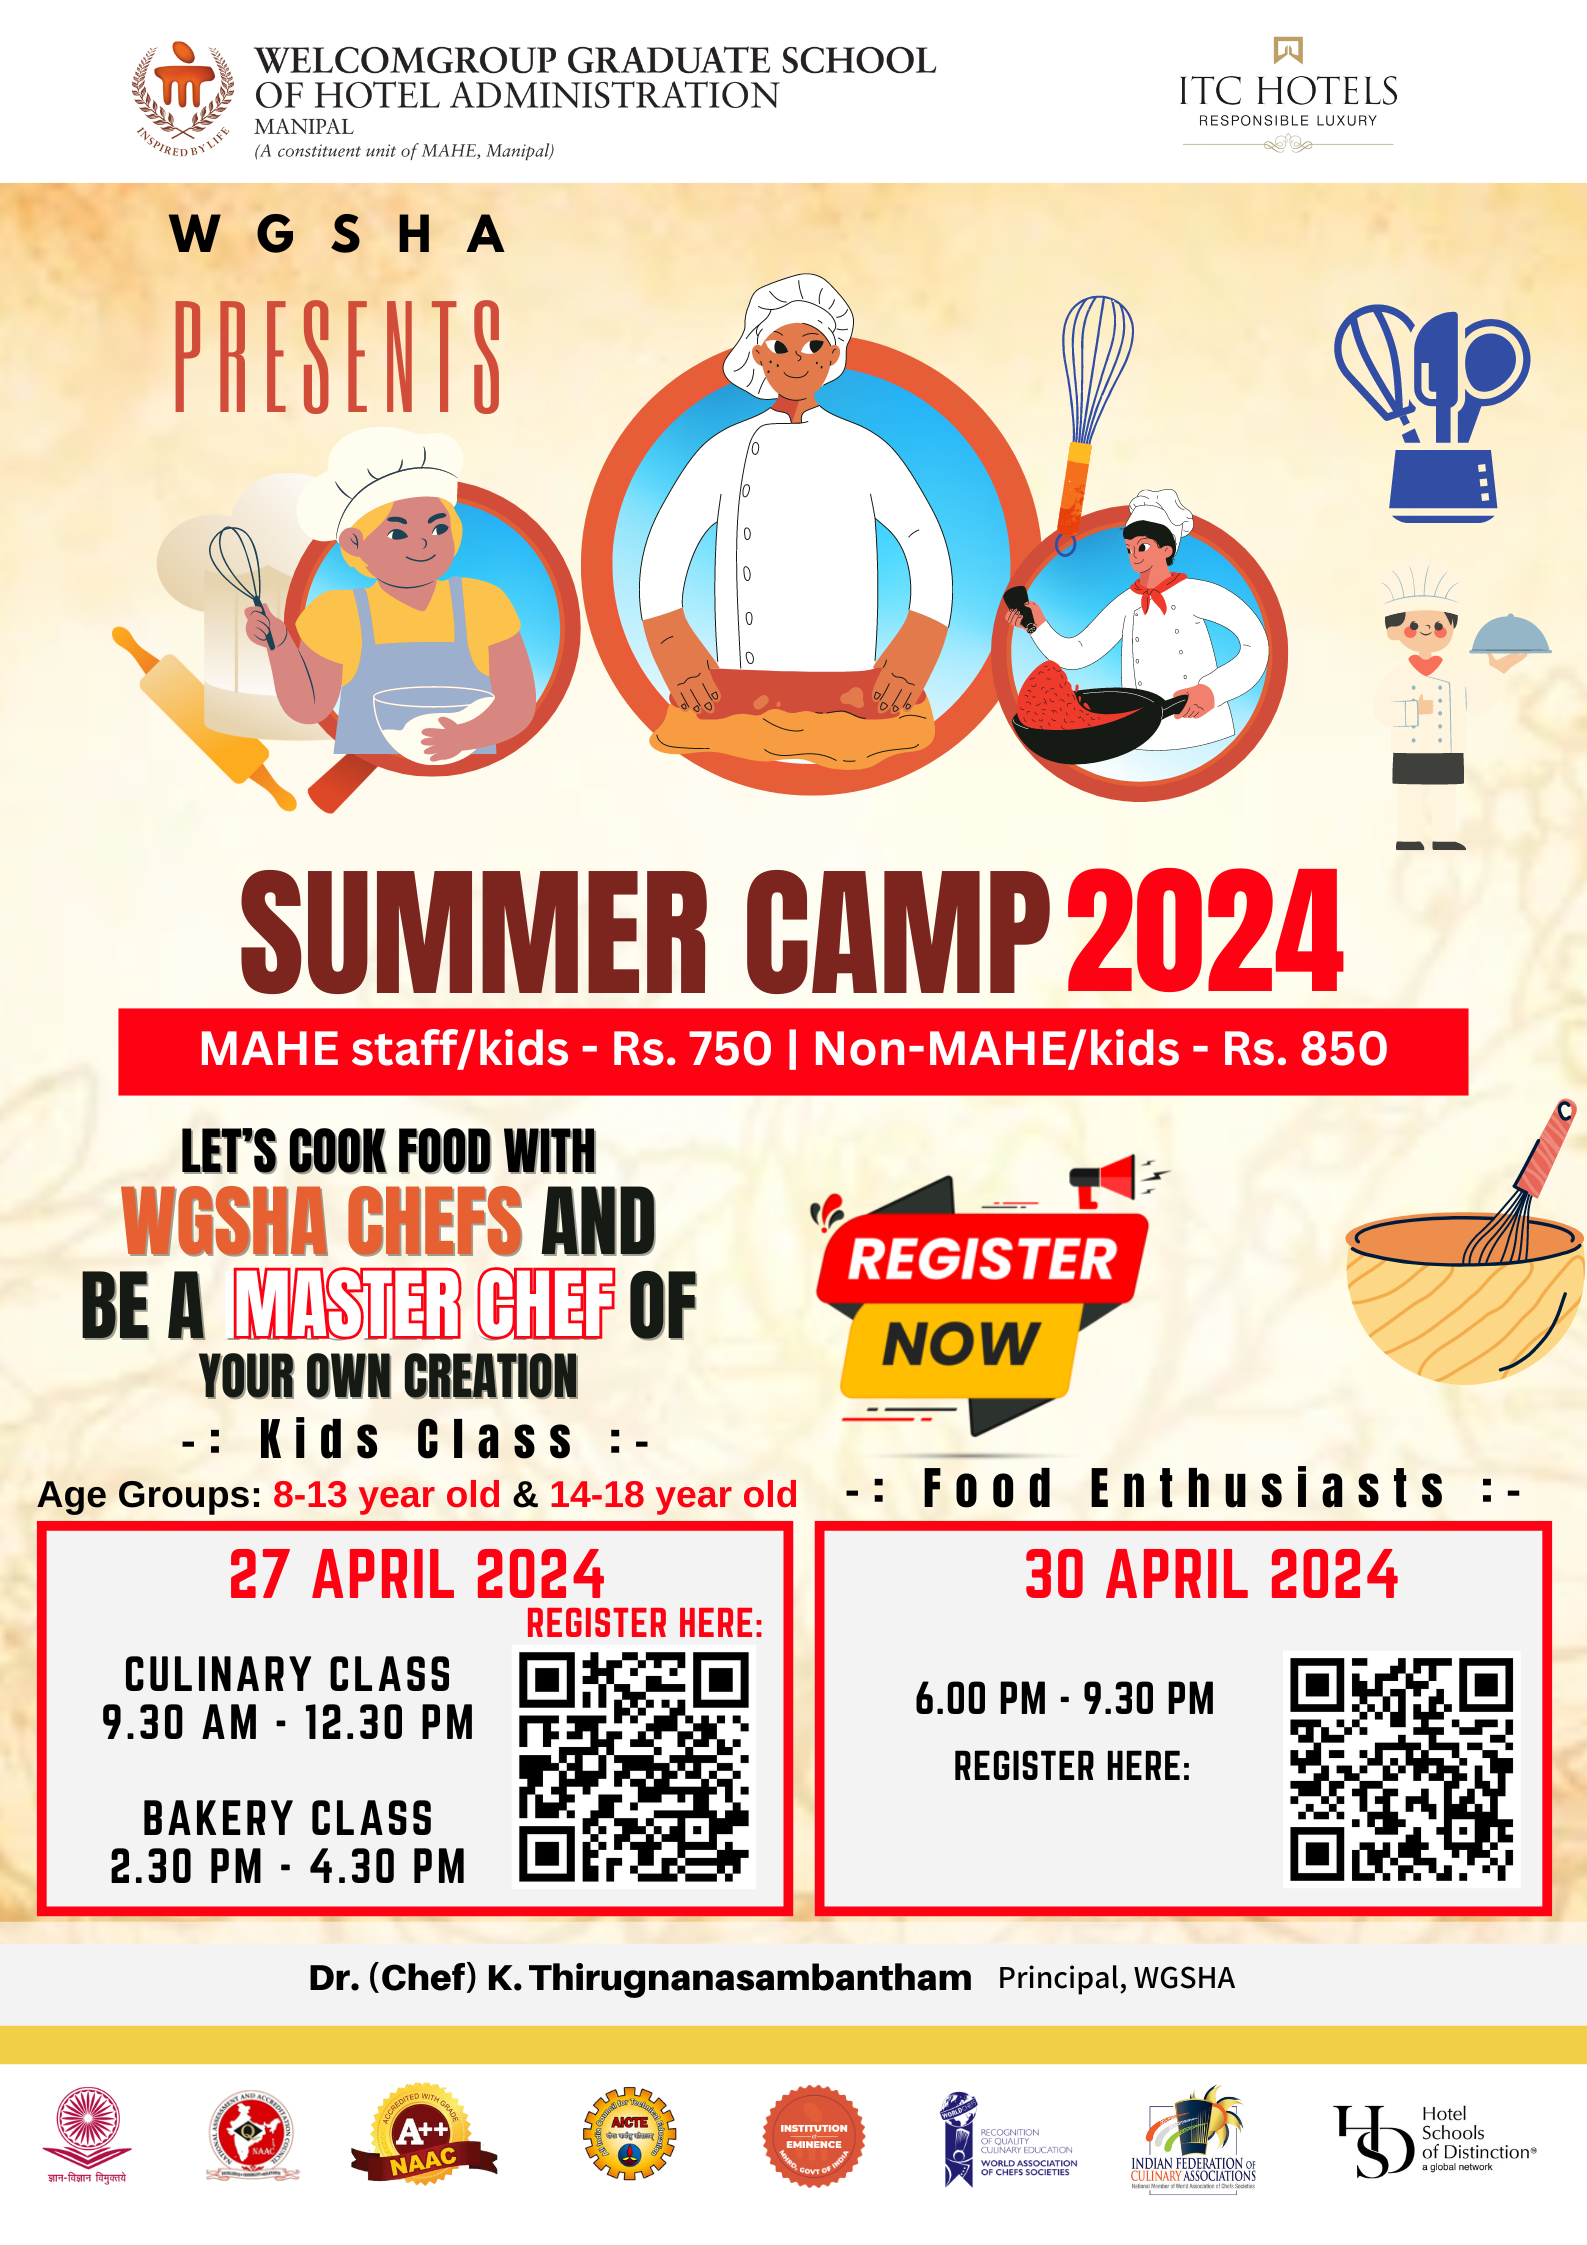 Summer Classes 2024 for kids and food enthusiasts at WGSHA